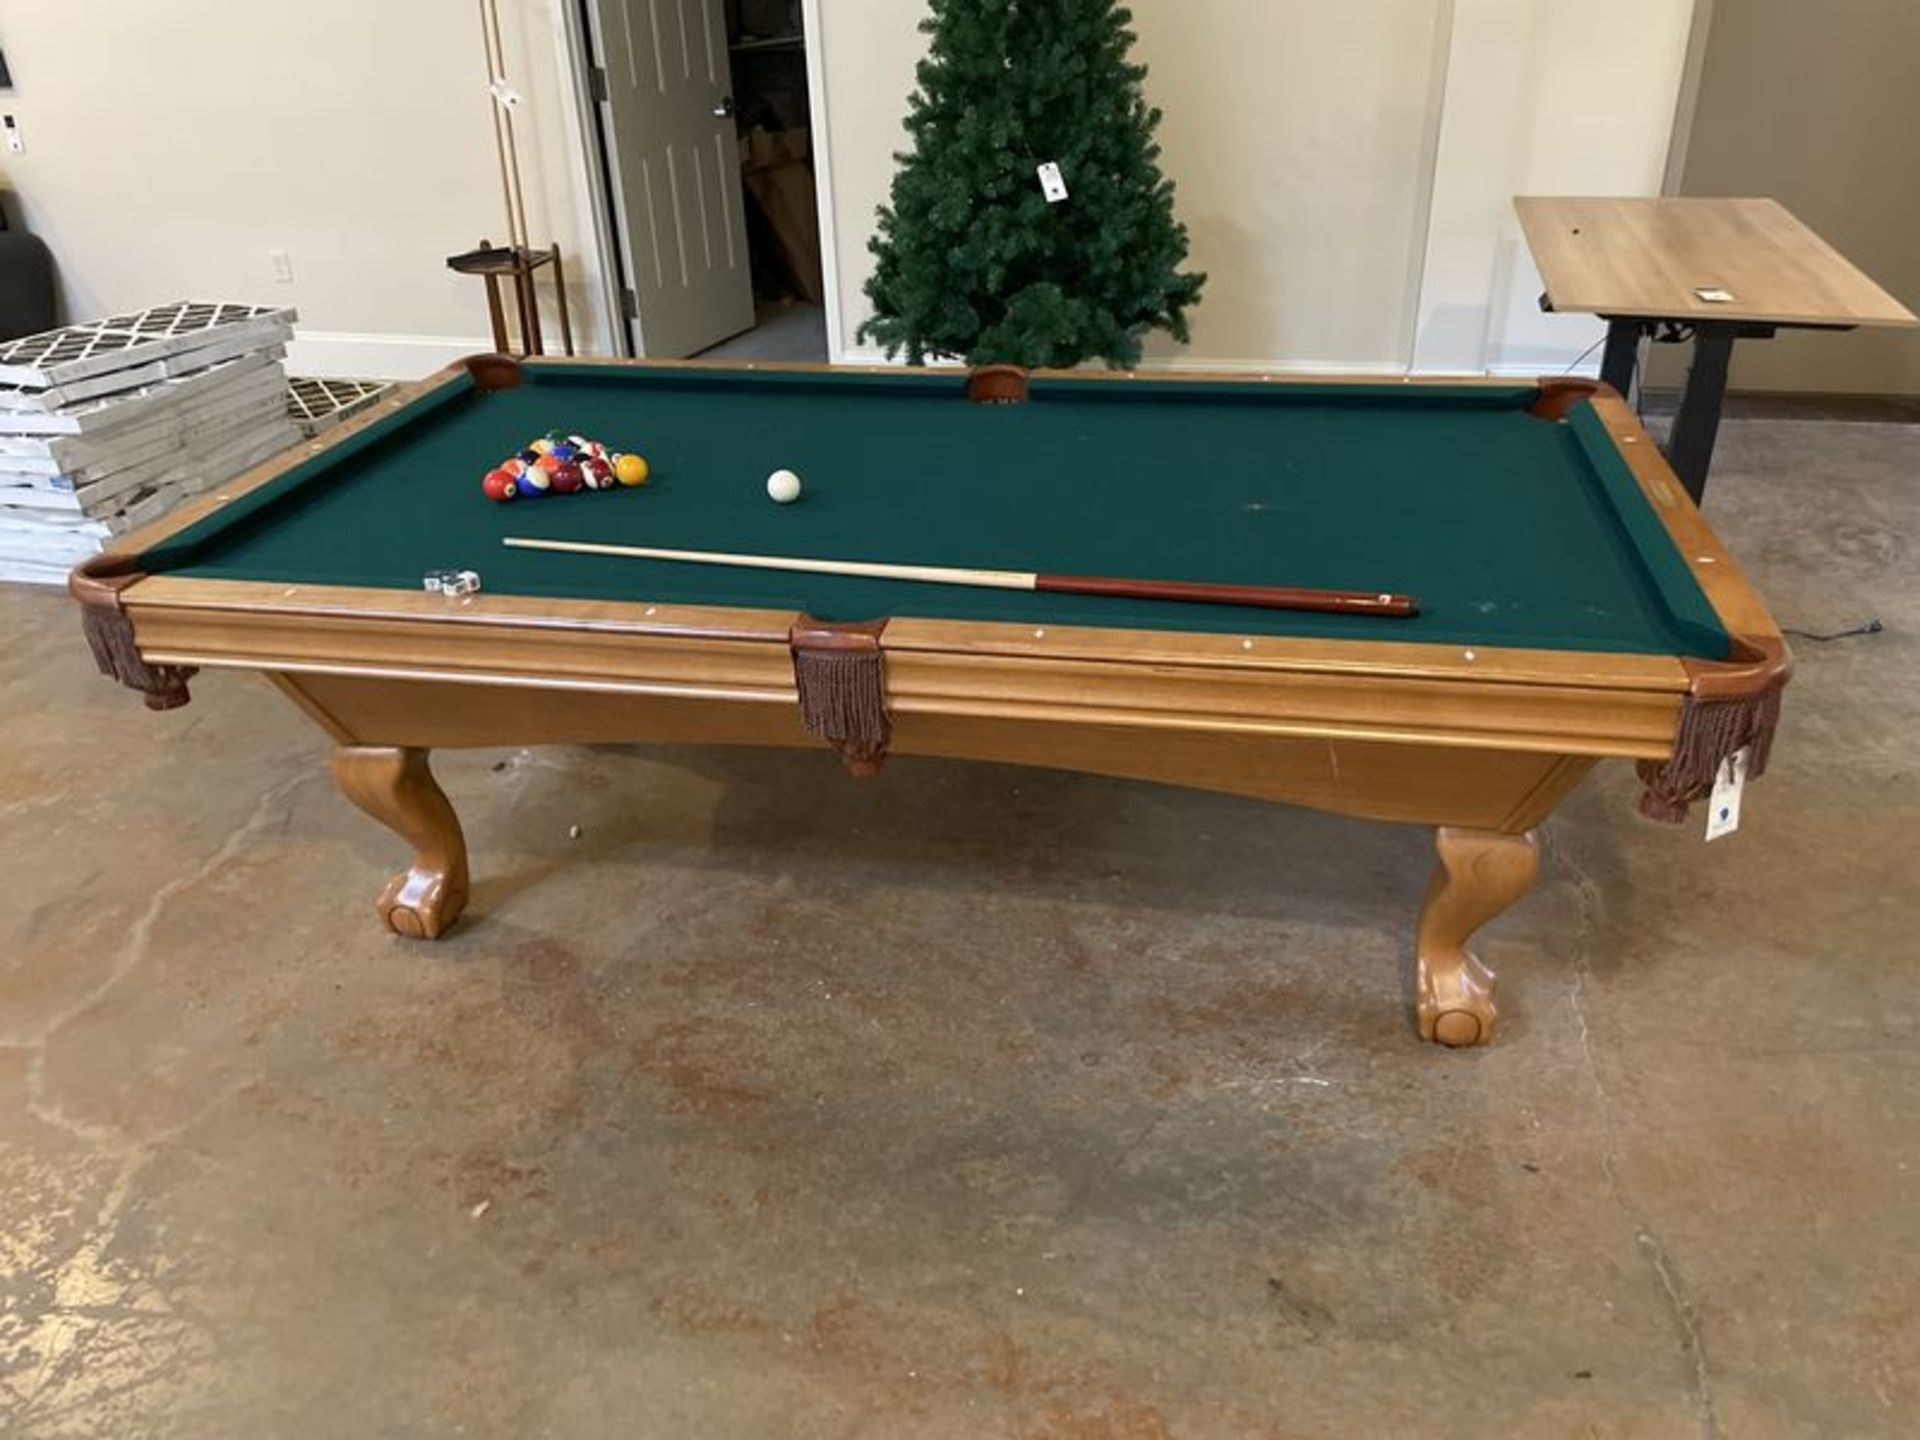 Contender by Brunswick Pool Table approx. 8' w/ Balls, Sticks, and Rack